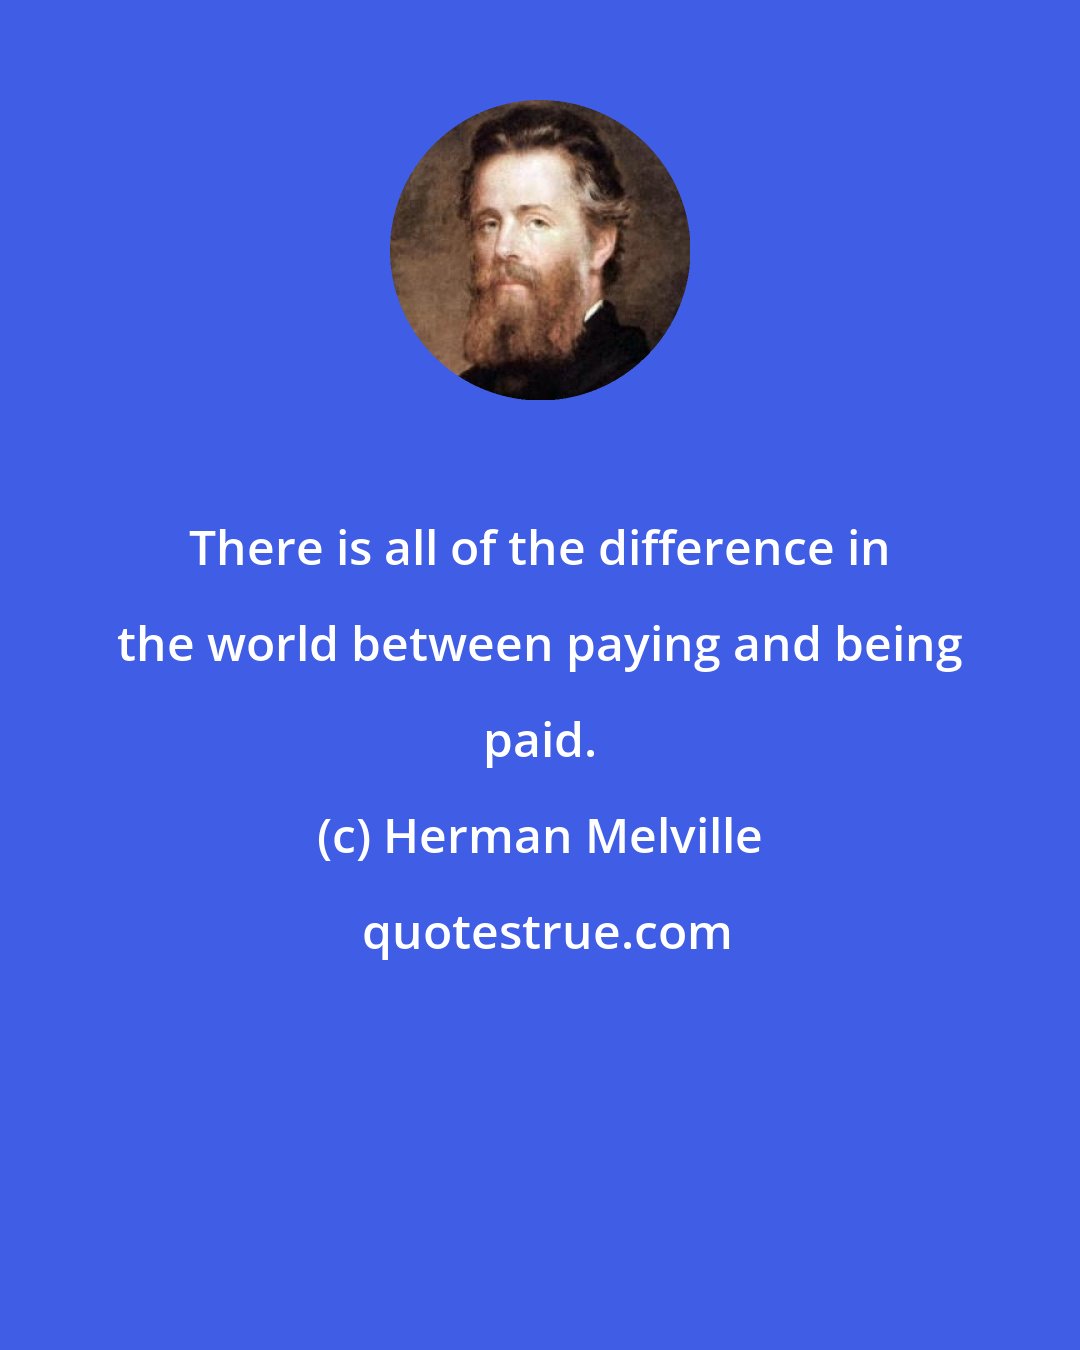 Herman Melville: There is all of the difference in the world between paying and being paid.